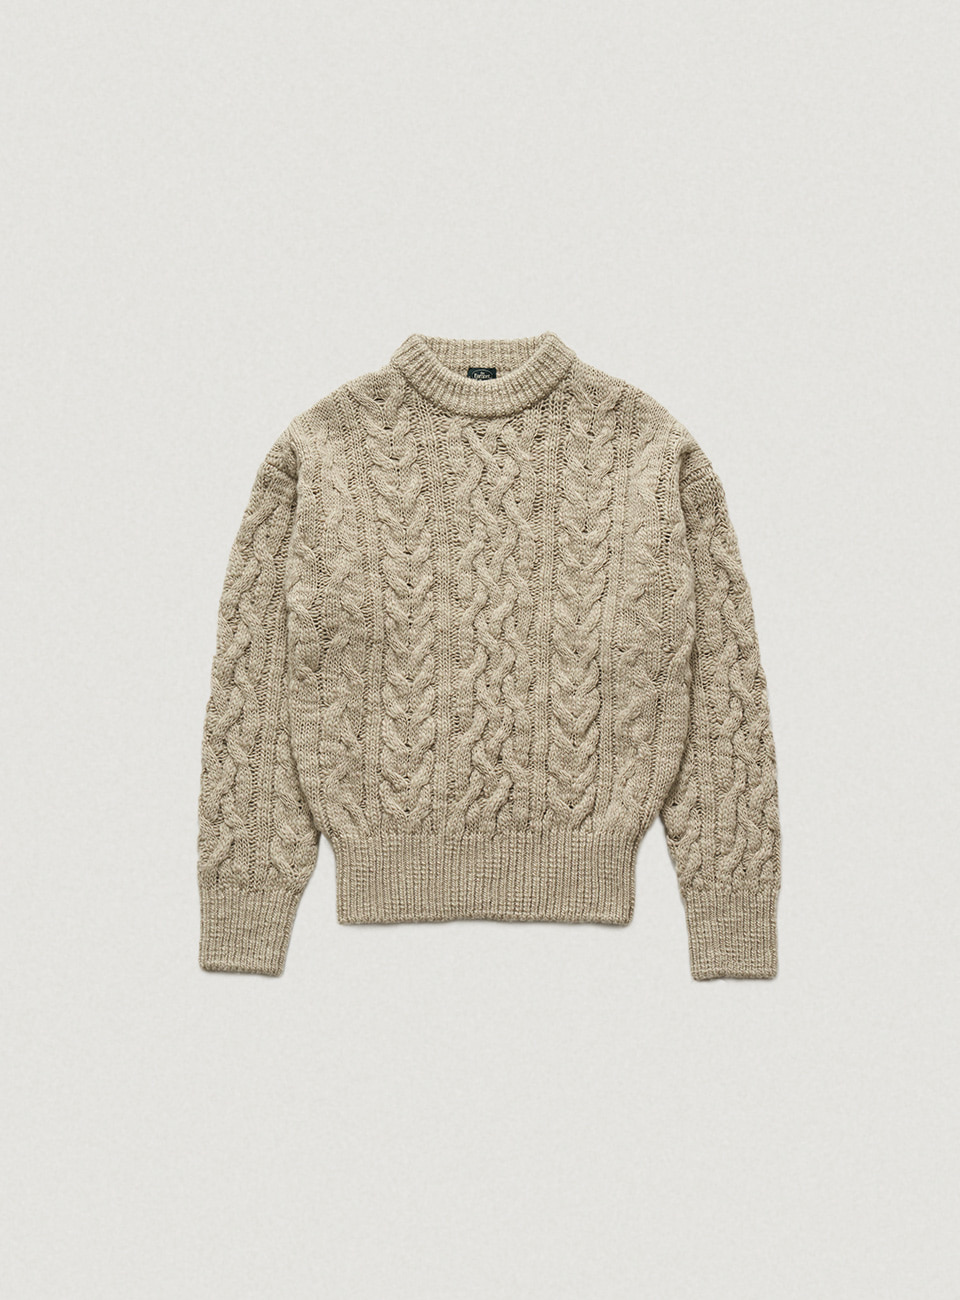 Oatmeal Cable Knit Sweater